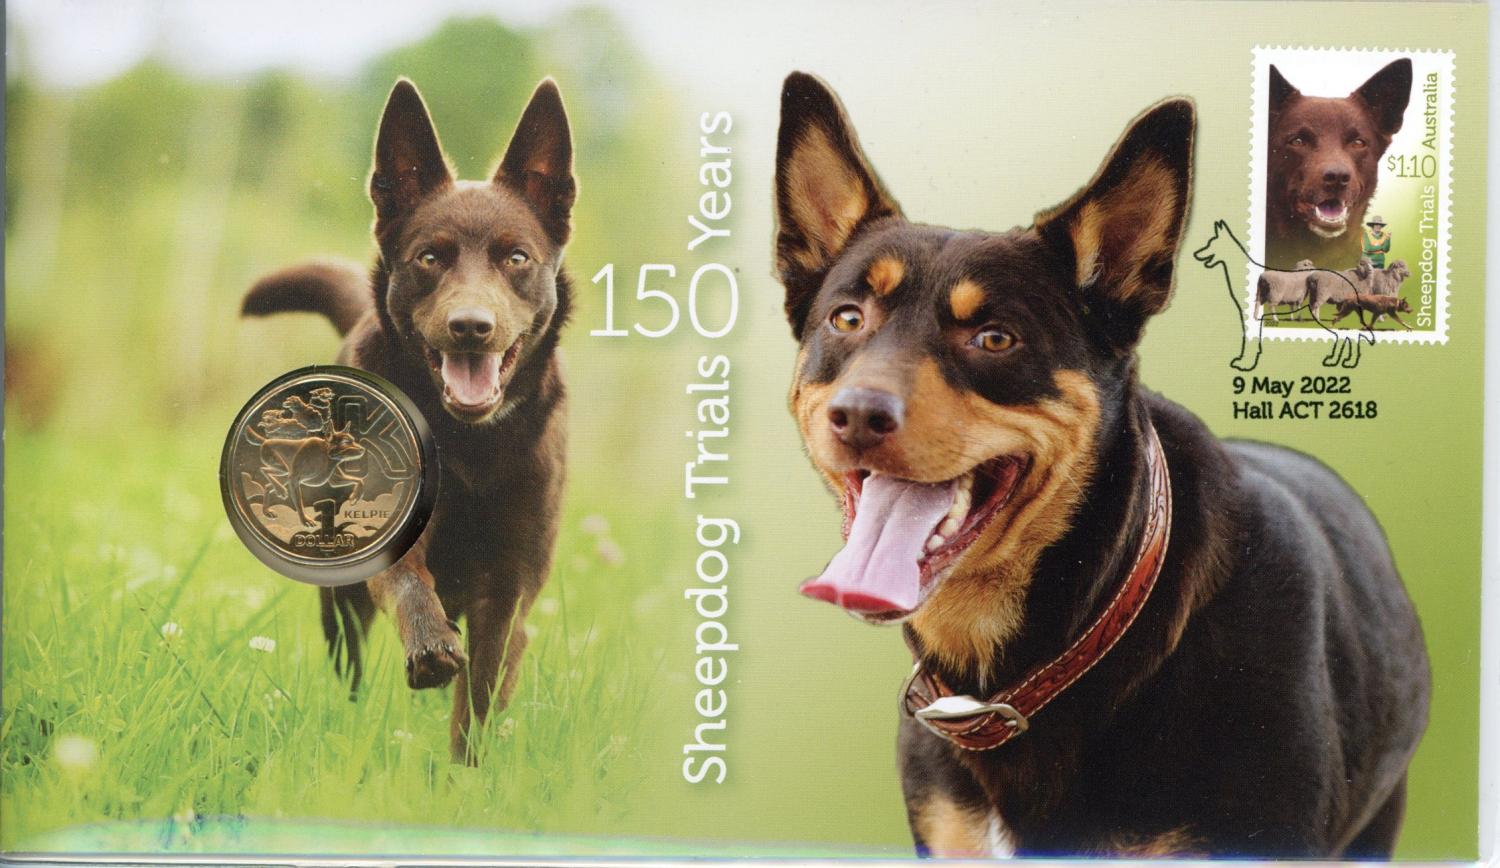 Thumbnail for 2022 - Issue 9 Sheepdog Trails 150 Years Postal Numismatic Cover with RAM K for Kelpie $1.00 Coin